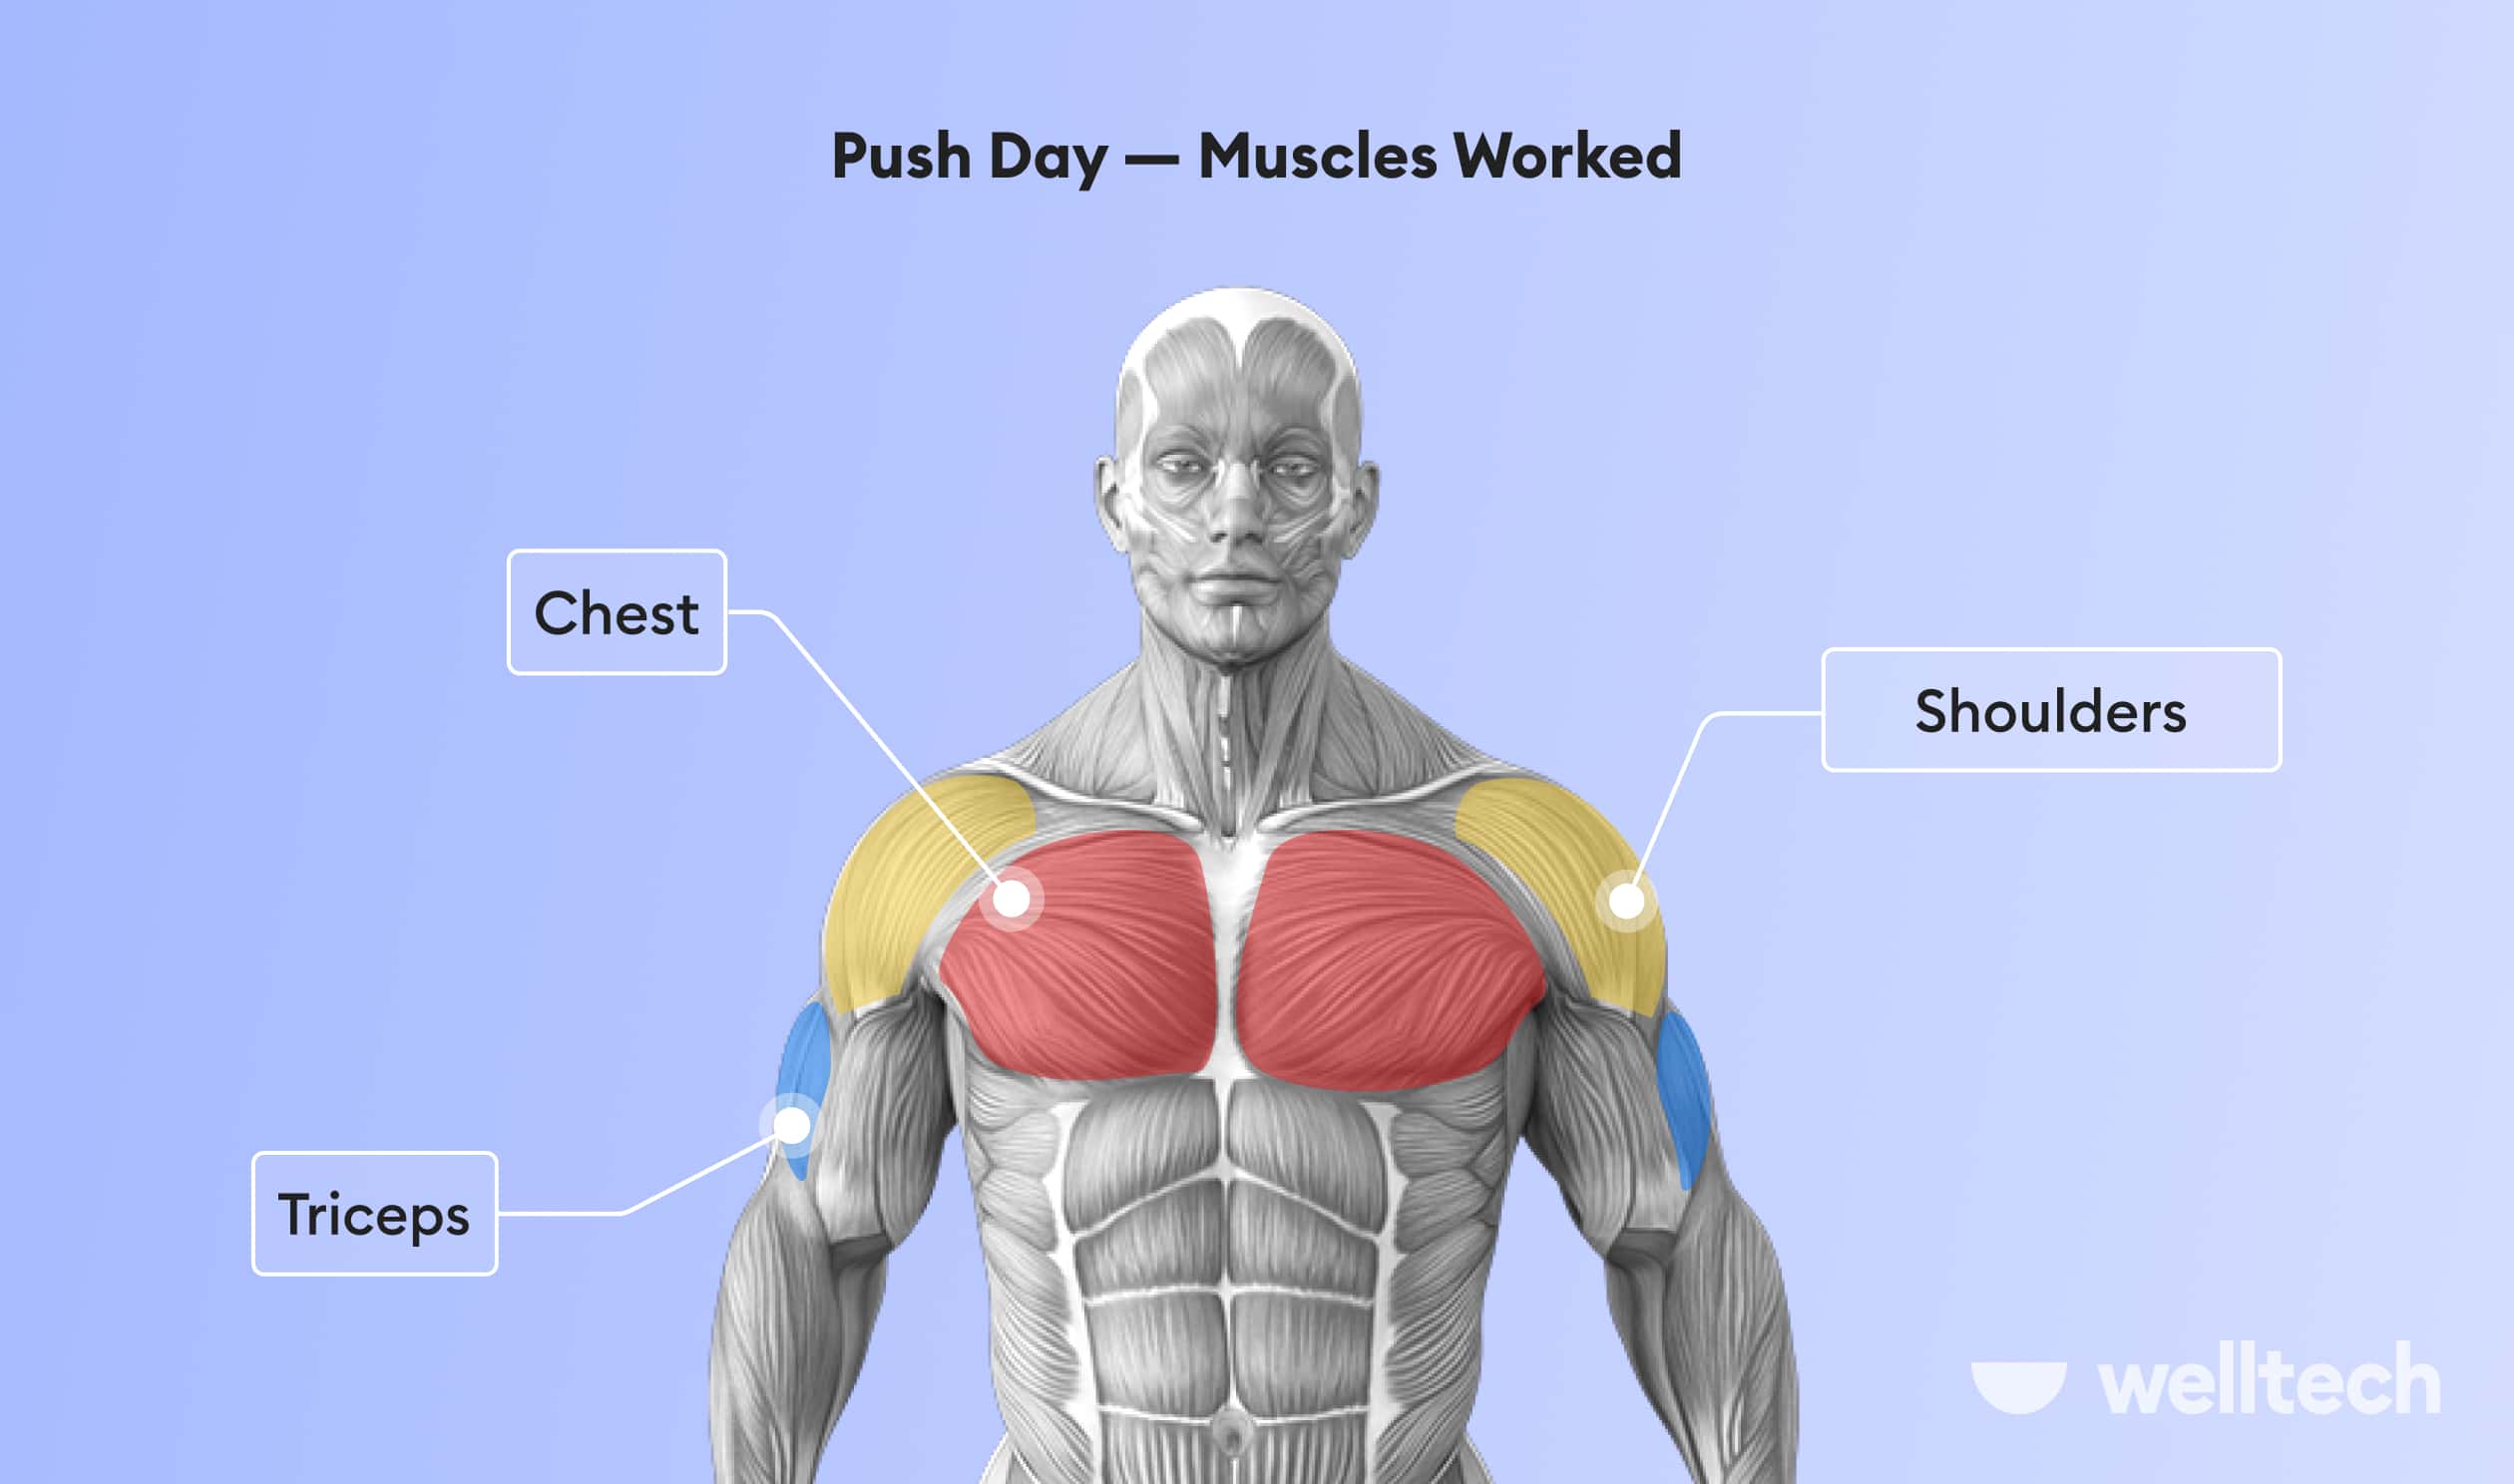 muscles worked during a push workout illustrated on a male model - chest, triceps, and shoulders